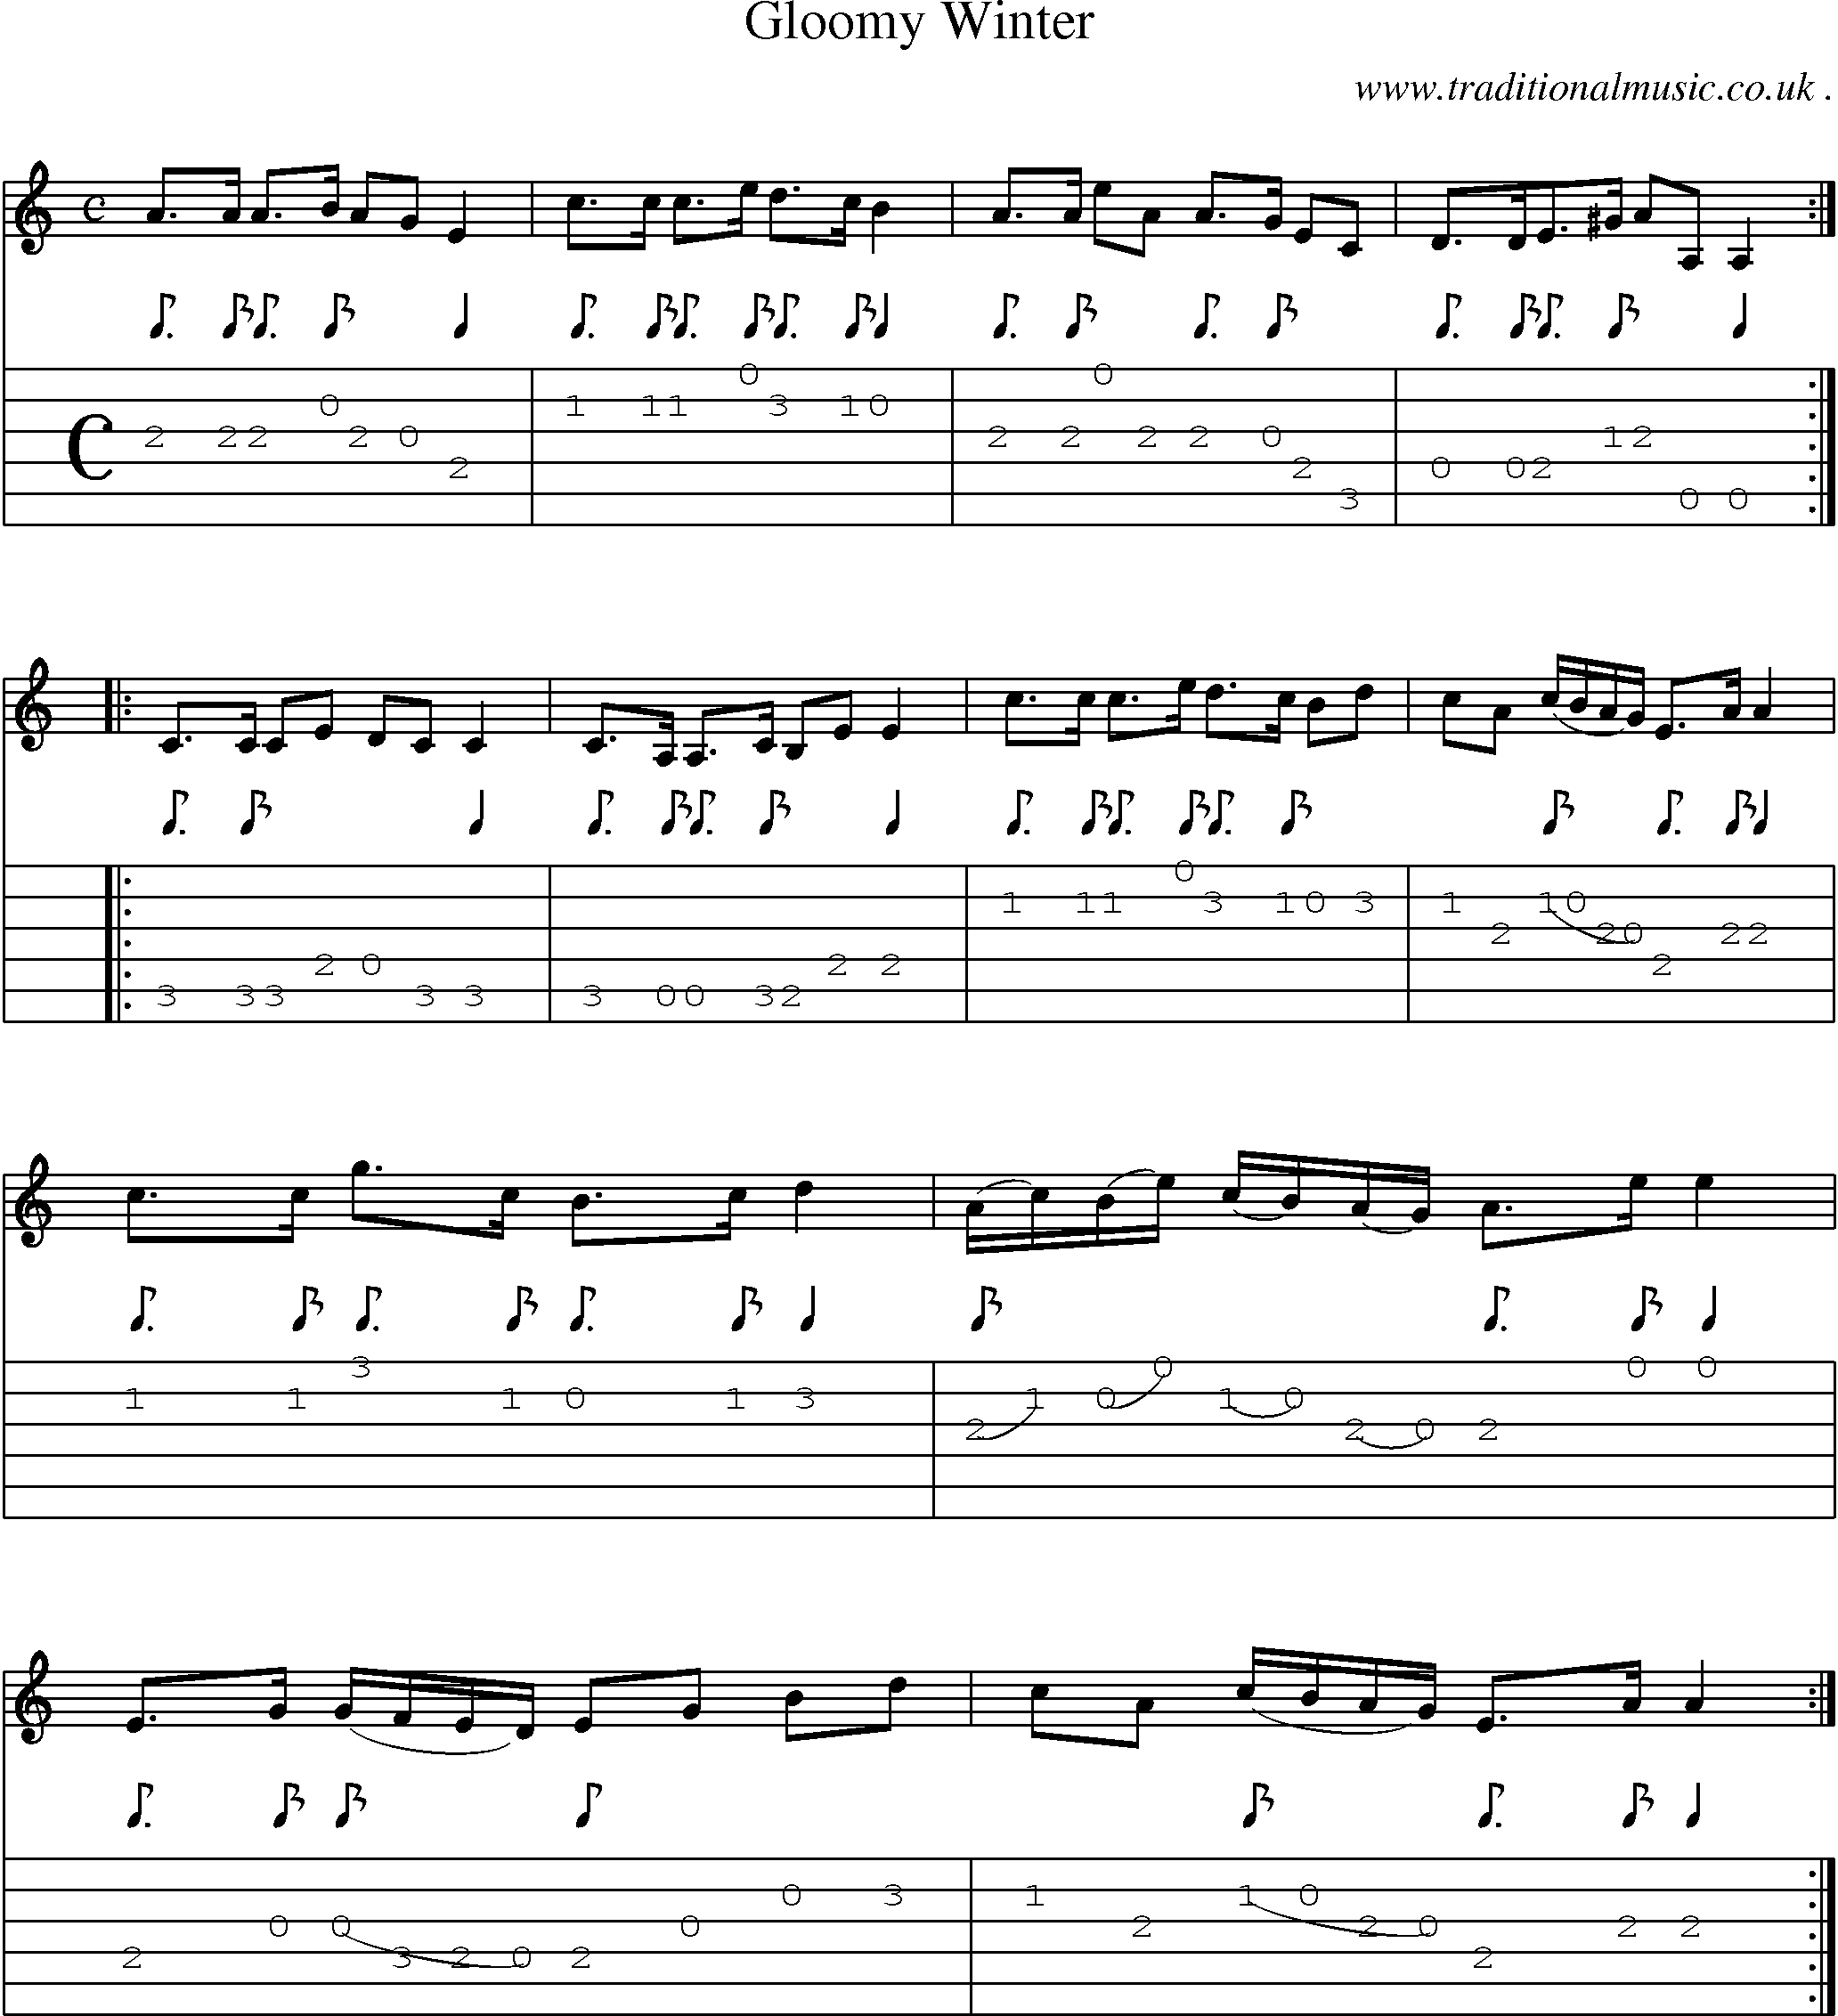 Sheet-Music and Guitar Tabs for Gloomy Winter